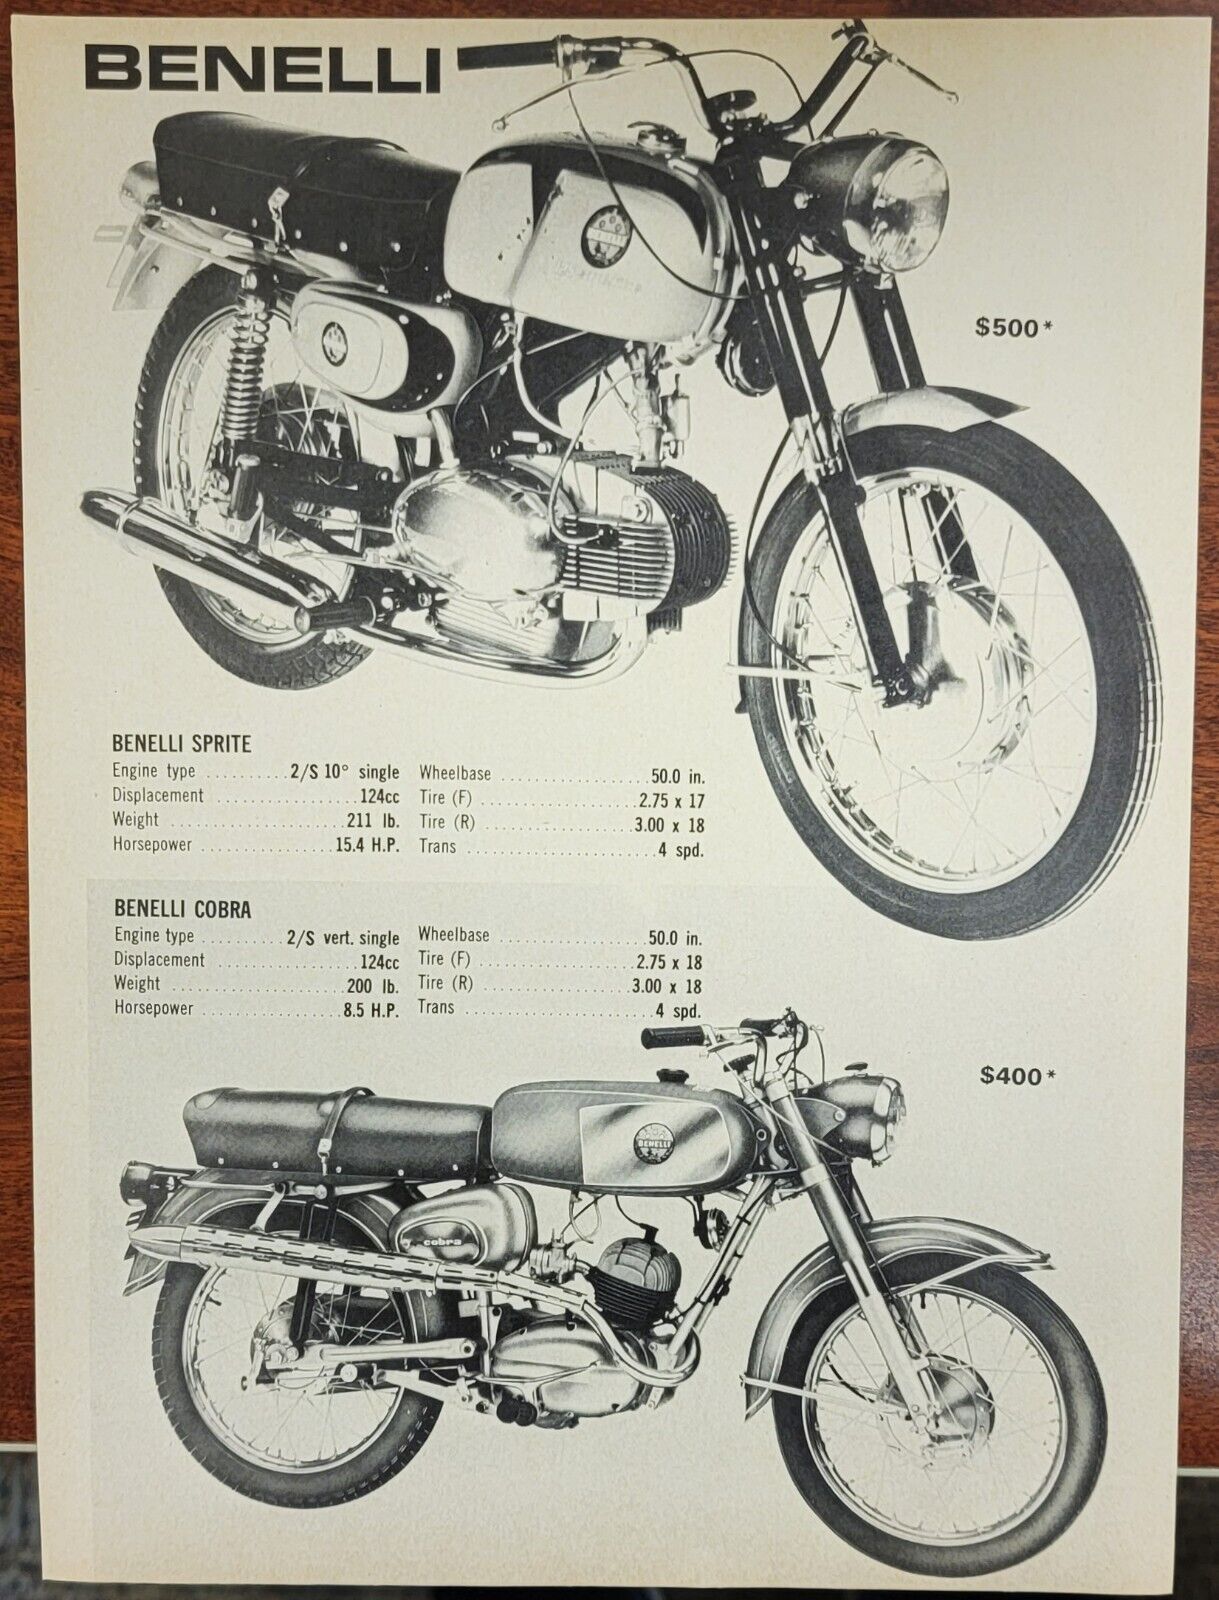 1967 Benelli Spitfire 125 Benelli Cobra 125 Motorcycle Pin Up